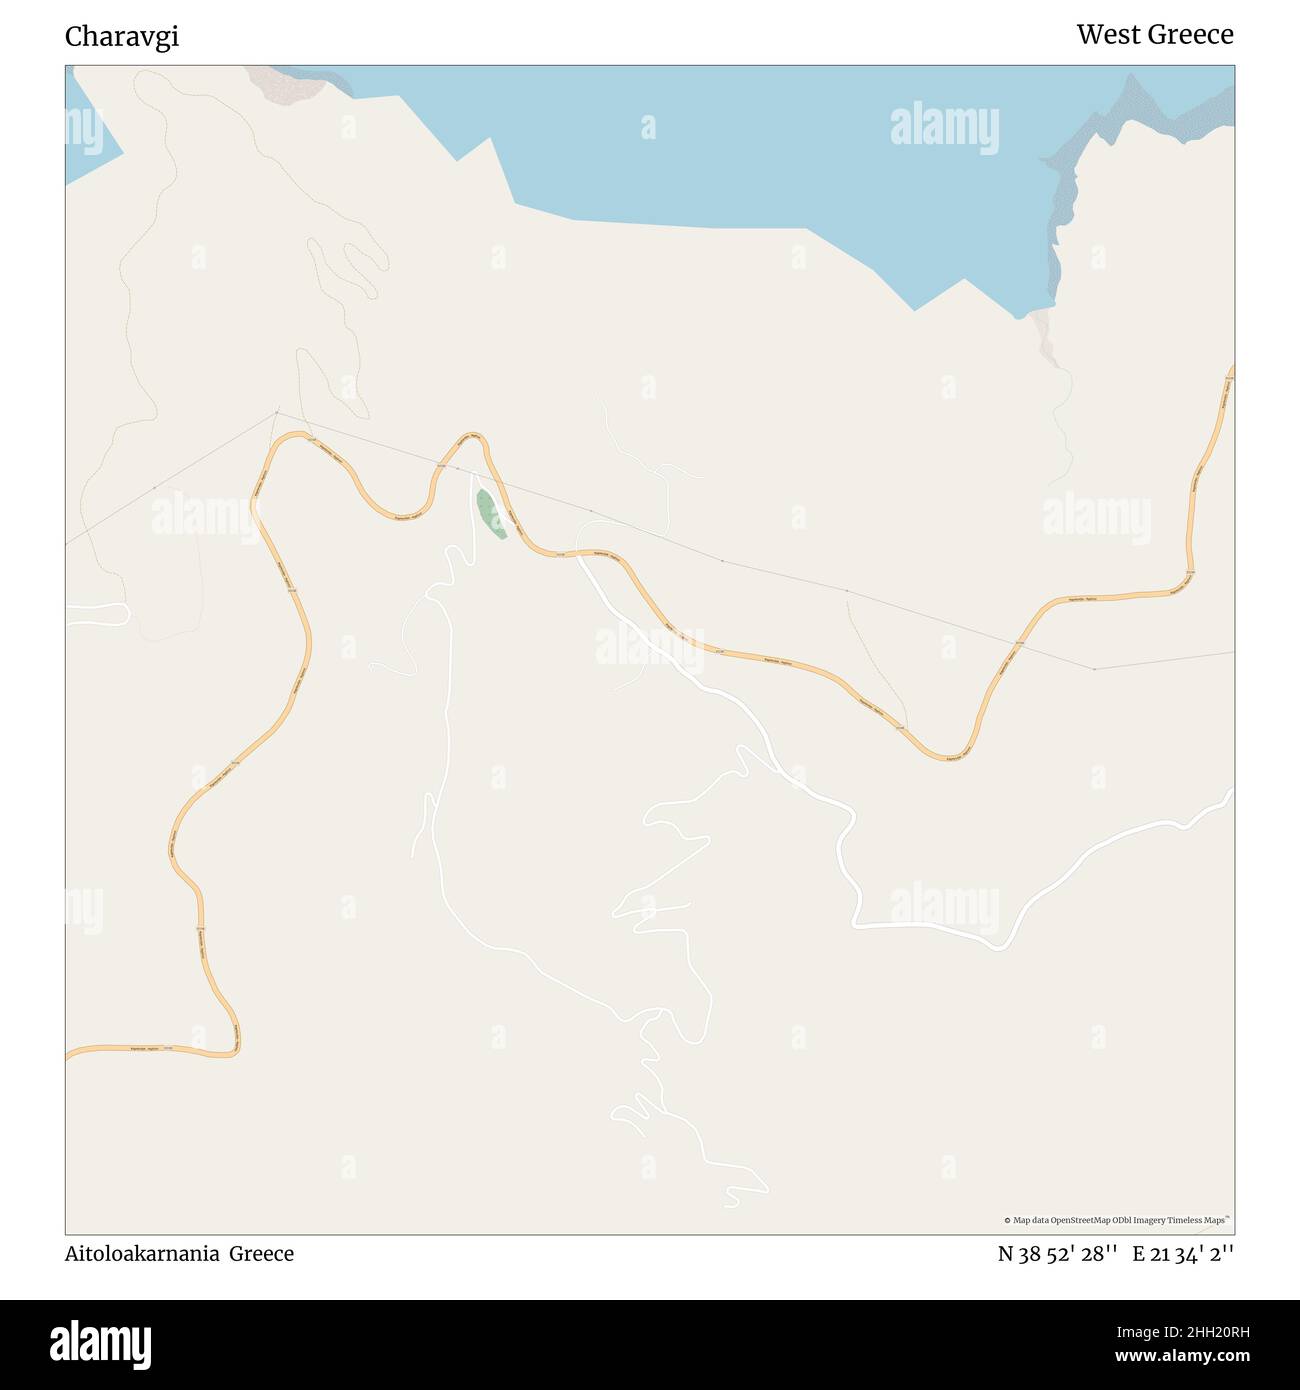 Charavgi, Aitoloakarnania, Greece, West Greece, N 38 52' 28'', E 21 34' 2'', map, Timeless Map published in 2021. Travelers, explorers and adventurers like Florence Nightingale, David Livingstone, Ernest Shackleton, Lewis and Clark and Sherlock Holmes relied on maps to plan travels to the world's most remote corners, Timeless Maps is mapping most locations on the globe, showing the achievement of great dreams Stock Photo